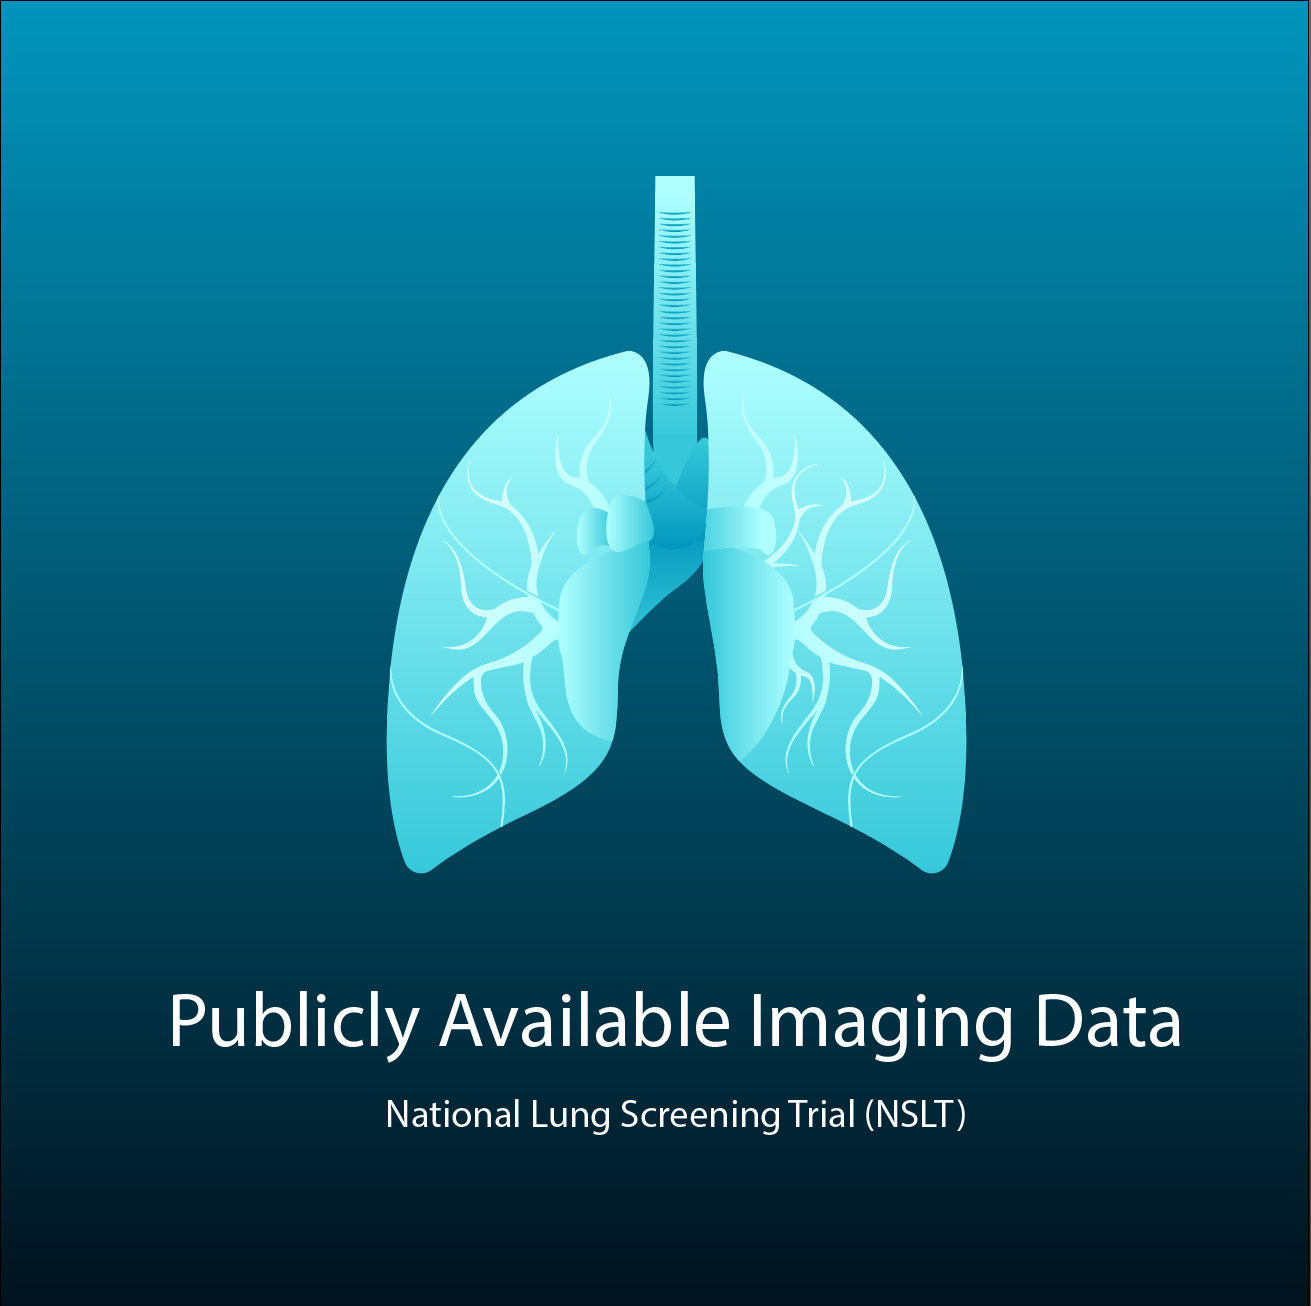 Publicly Available Imaging Data | National Lung Screening Trial (NLST)